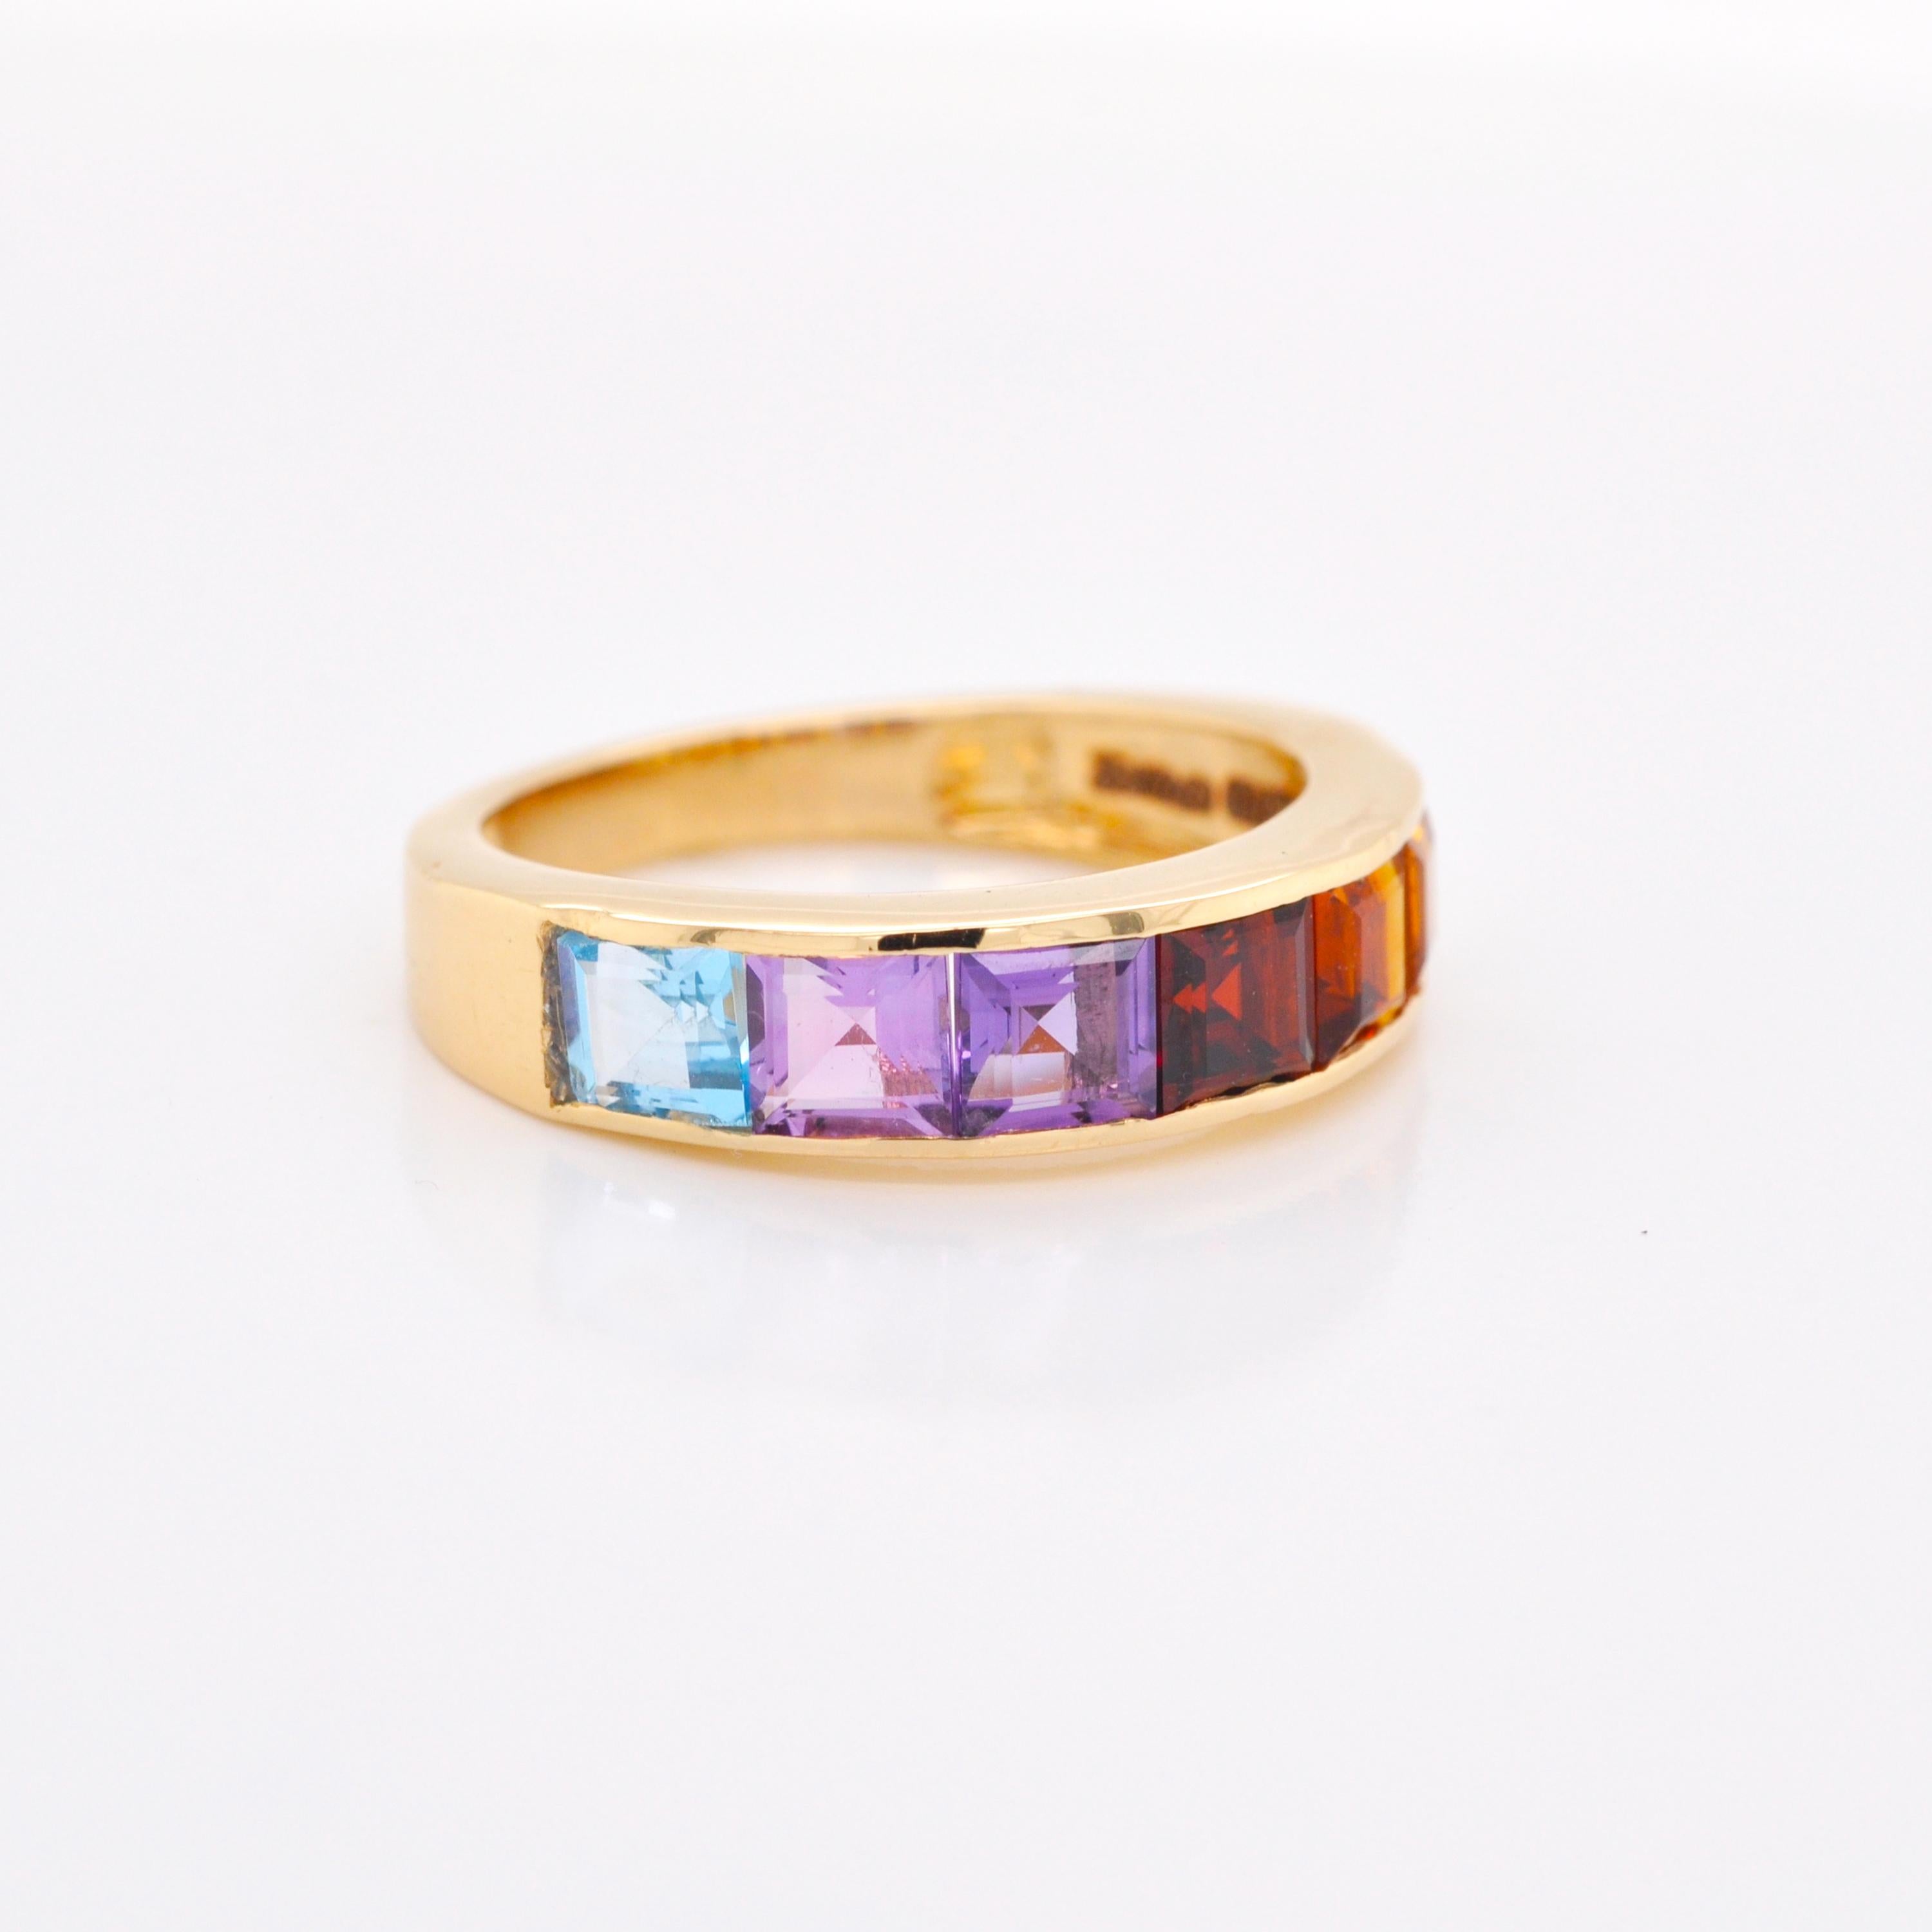 For Sale:  18K Gold Channel-Set 4 MM Square Rainbow Gemstones Eternity Half Band Ring 5